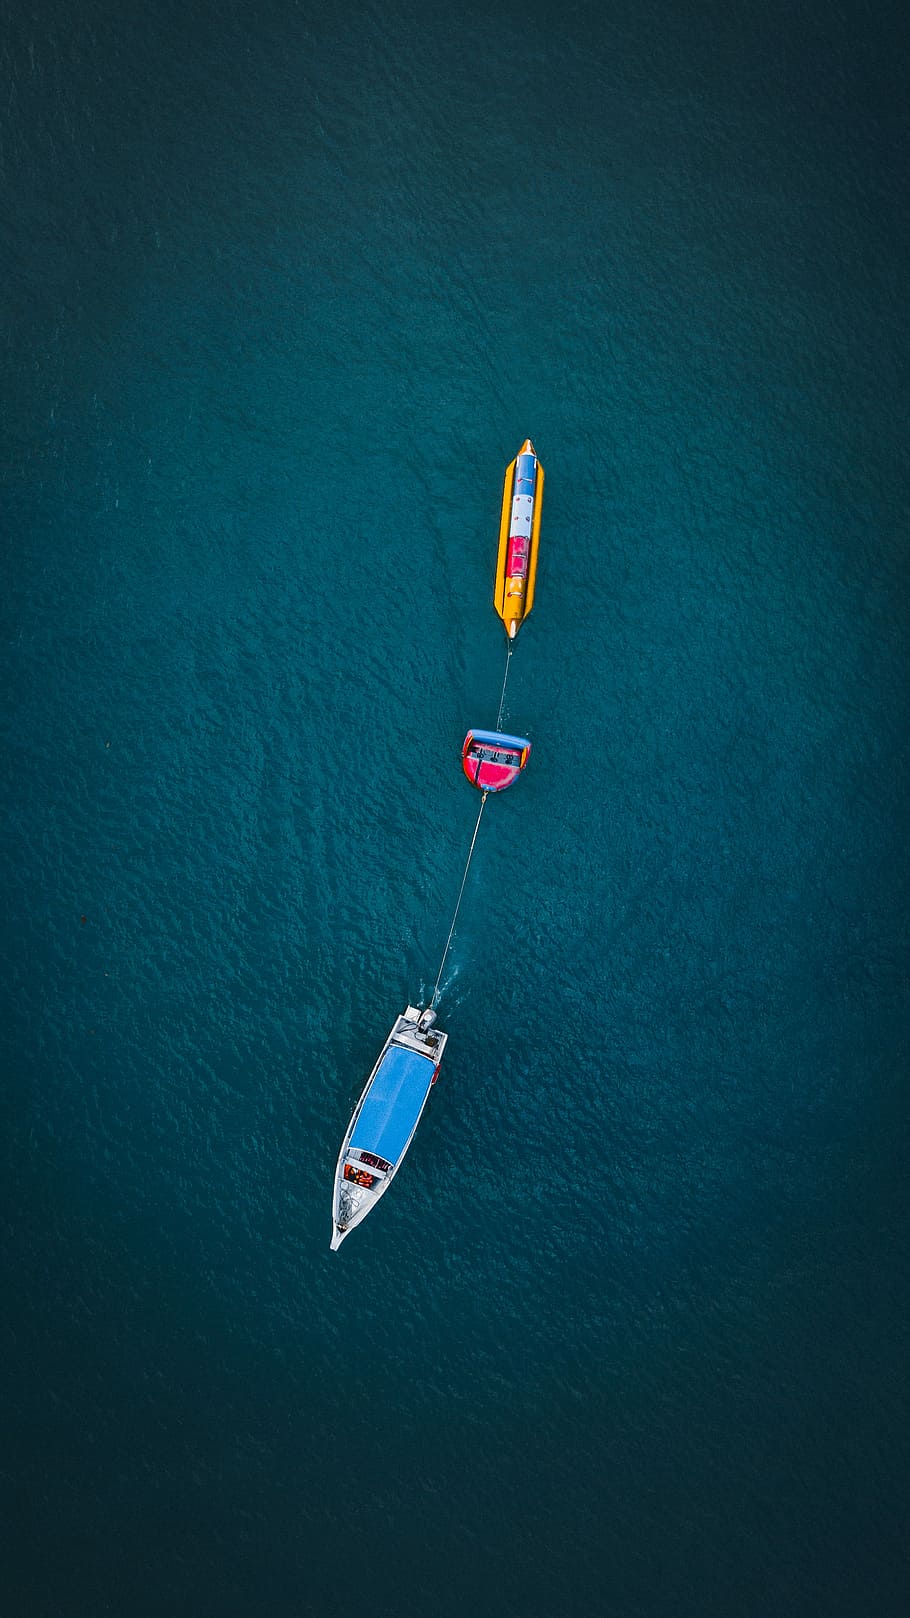 white and yellow boats on body of water, aerial view of boat pulling banana boat